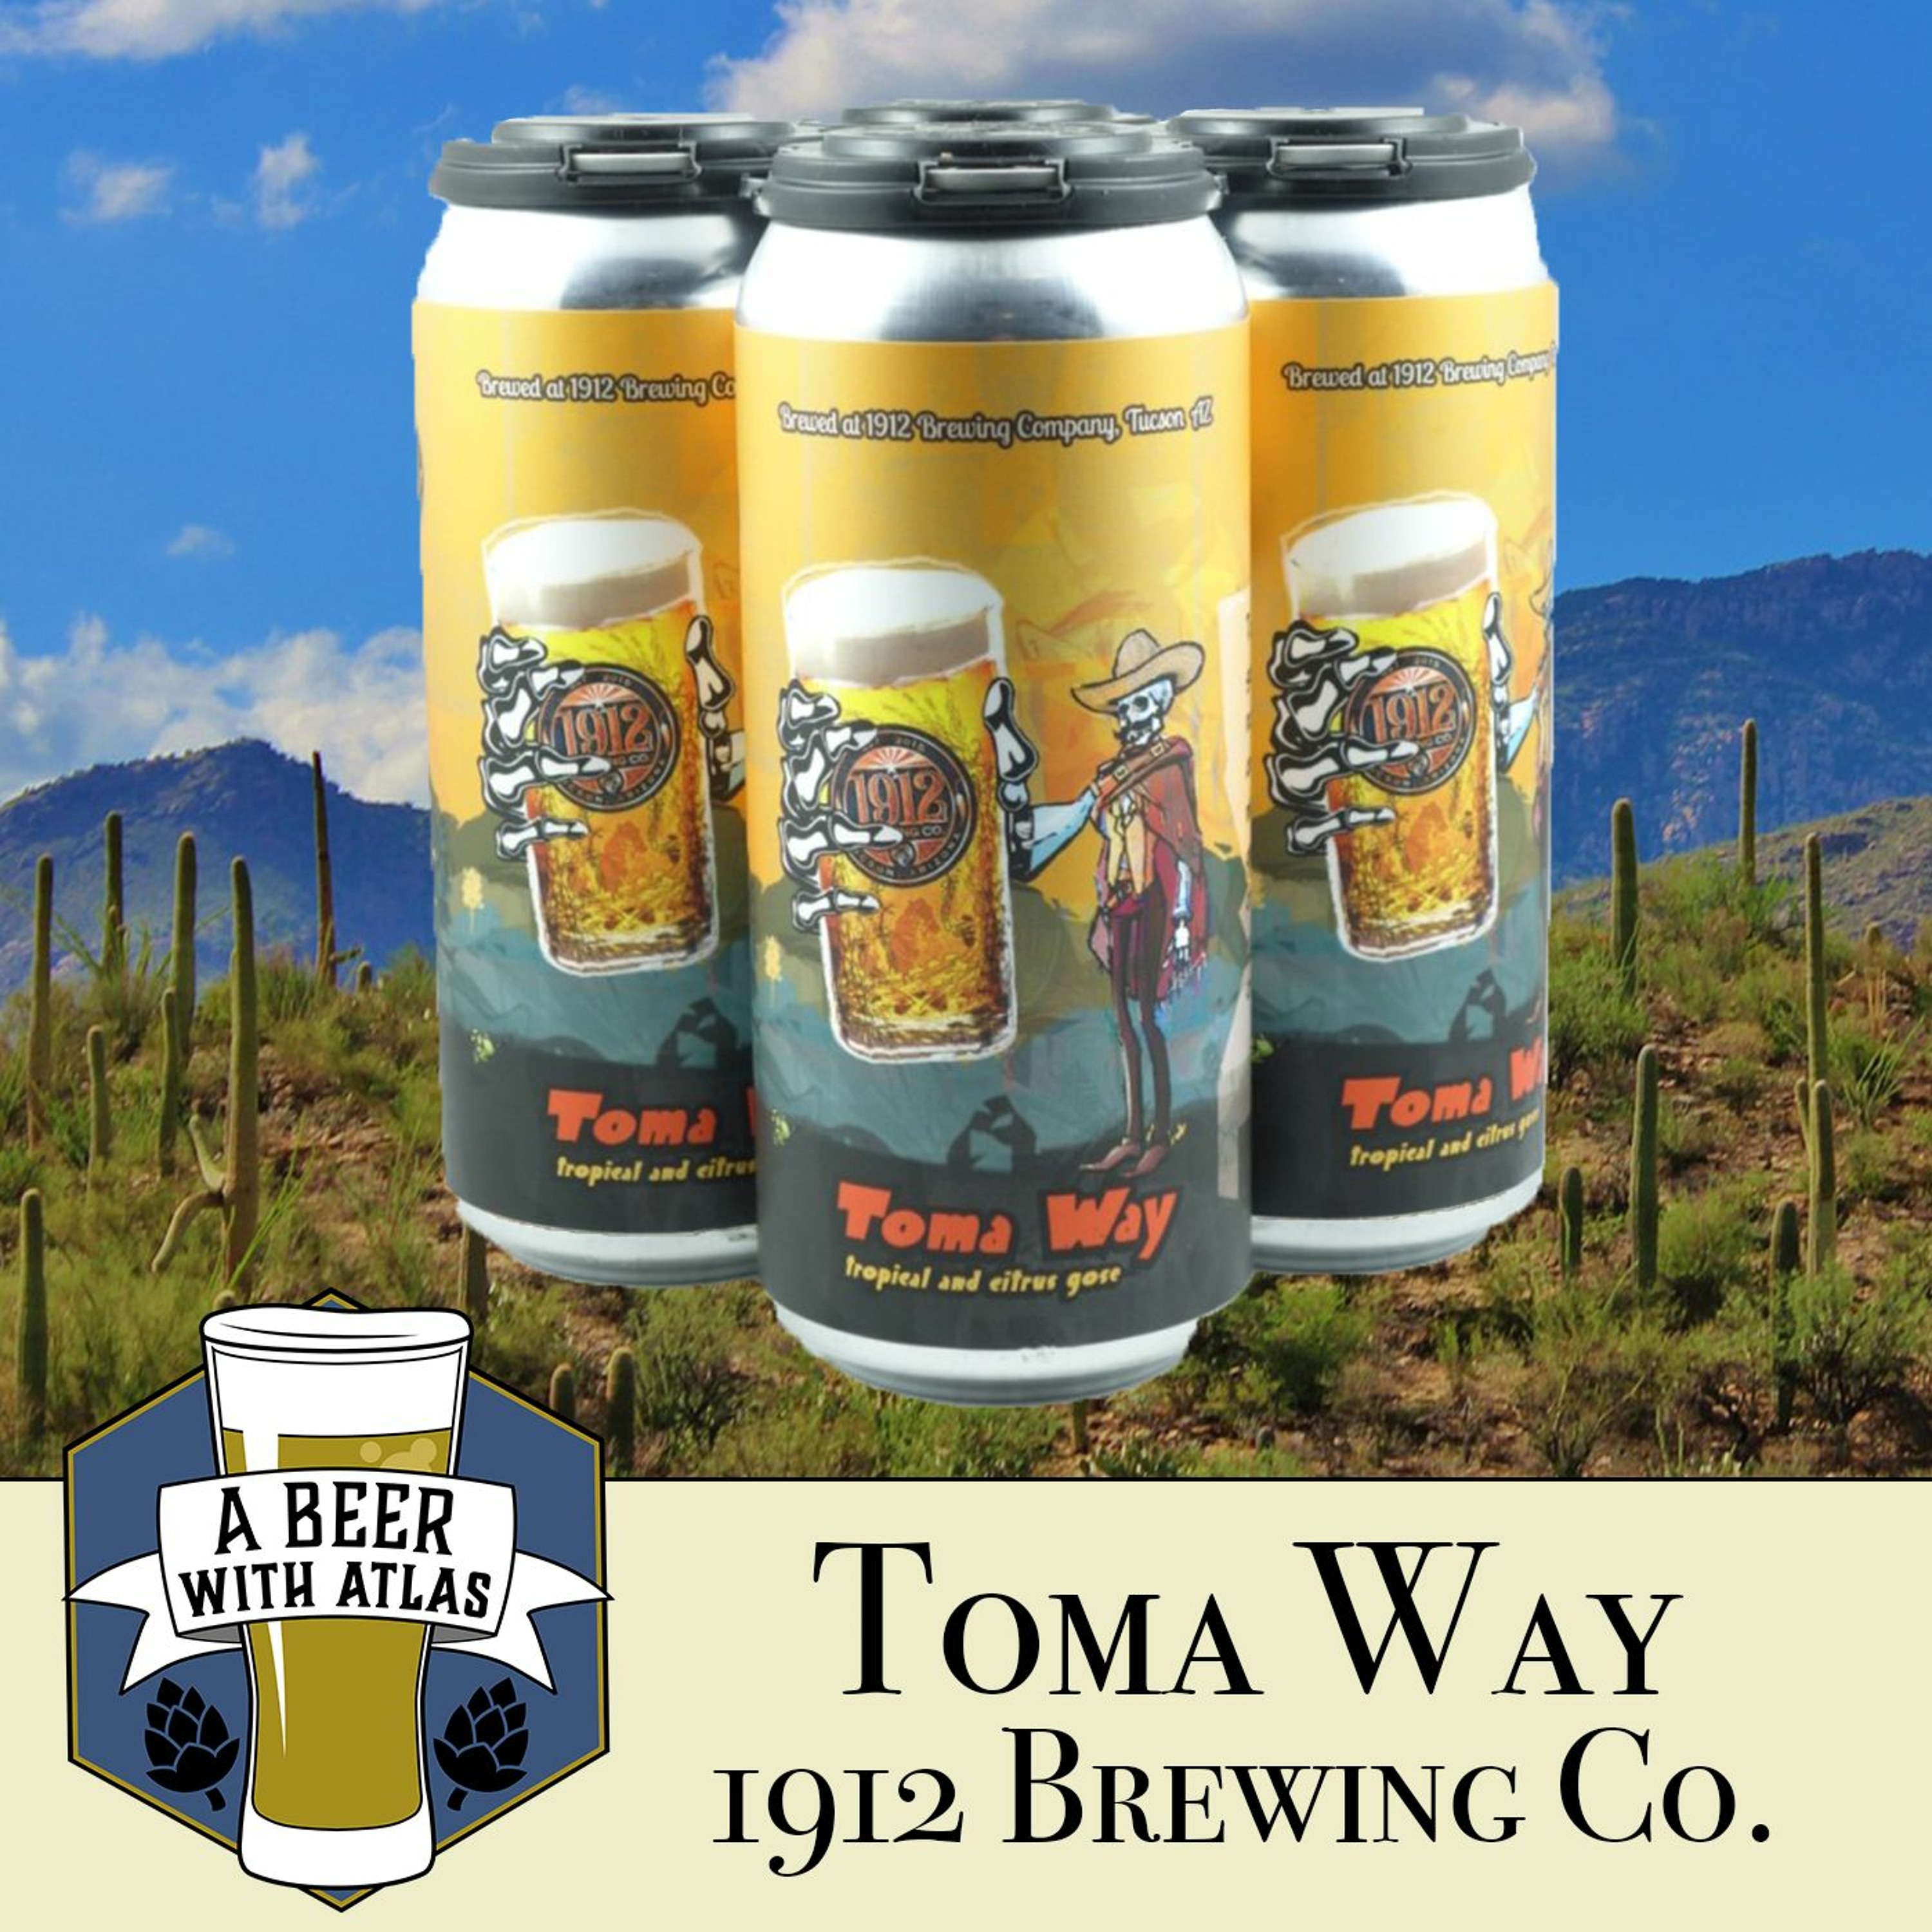 Toma Way | 1912 Brewing Co. - A Beer with Atlas 148, a travel nurse craft beer podcast